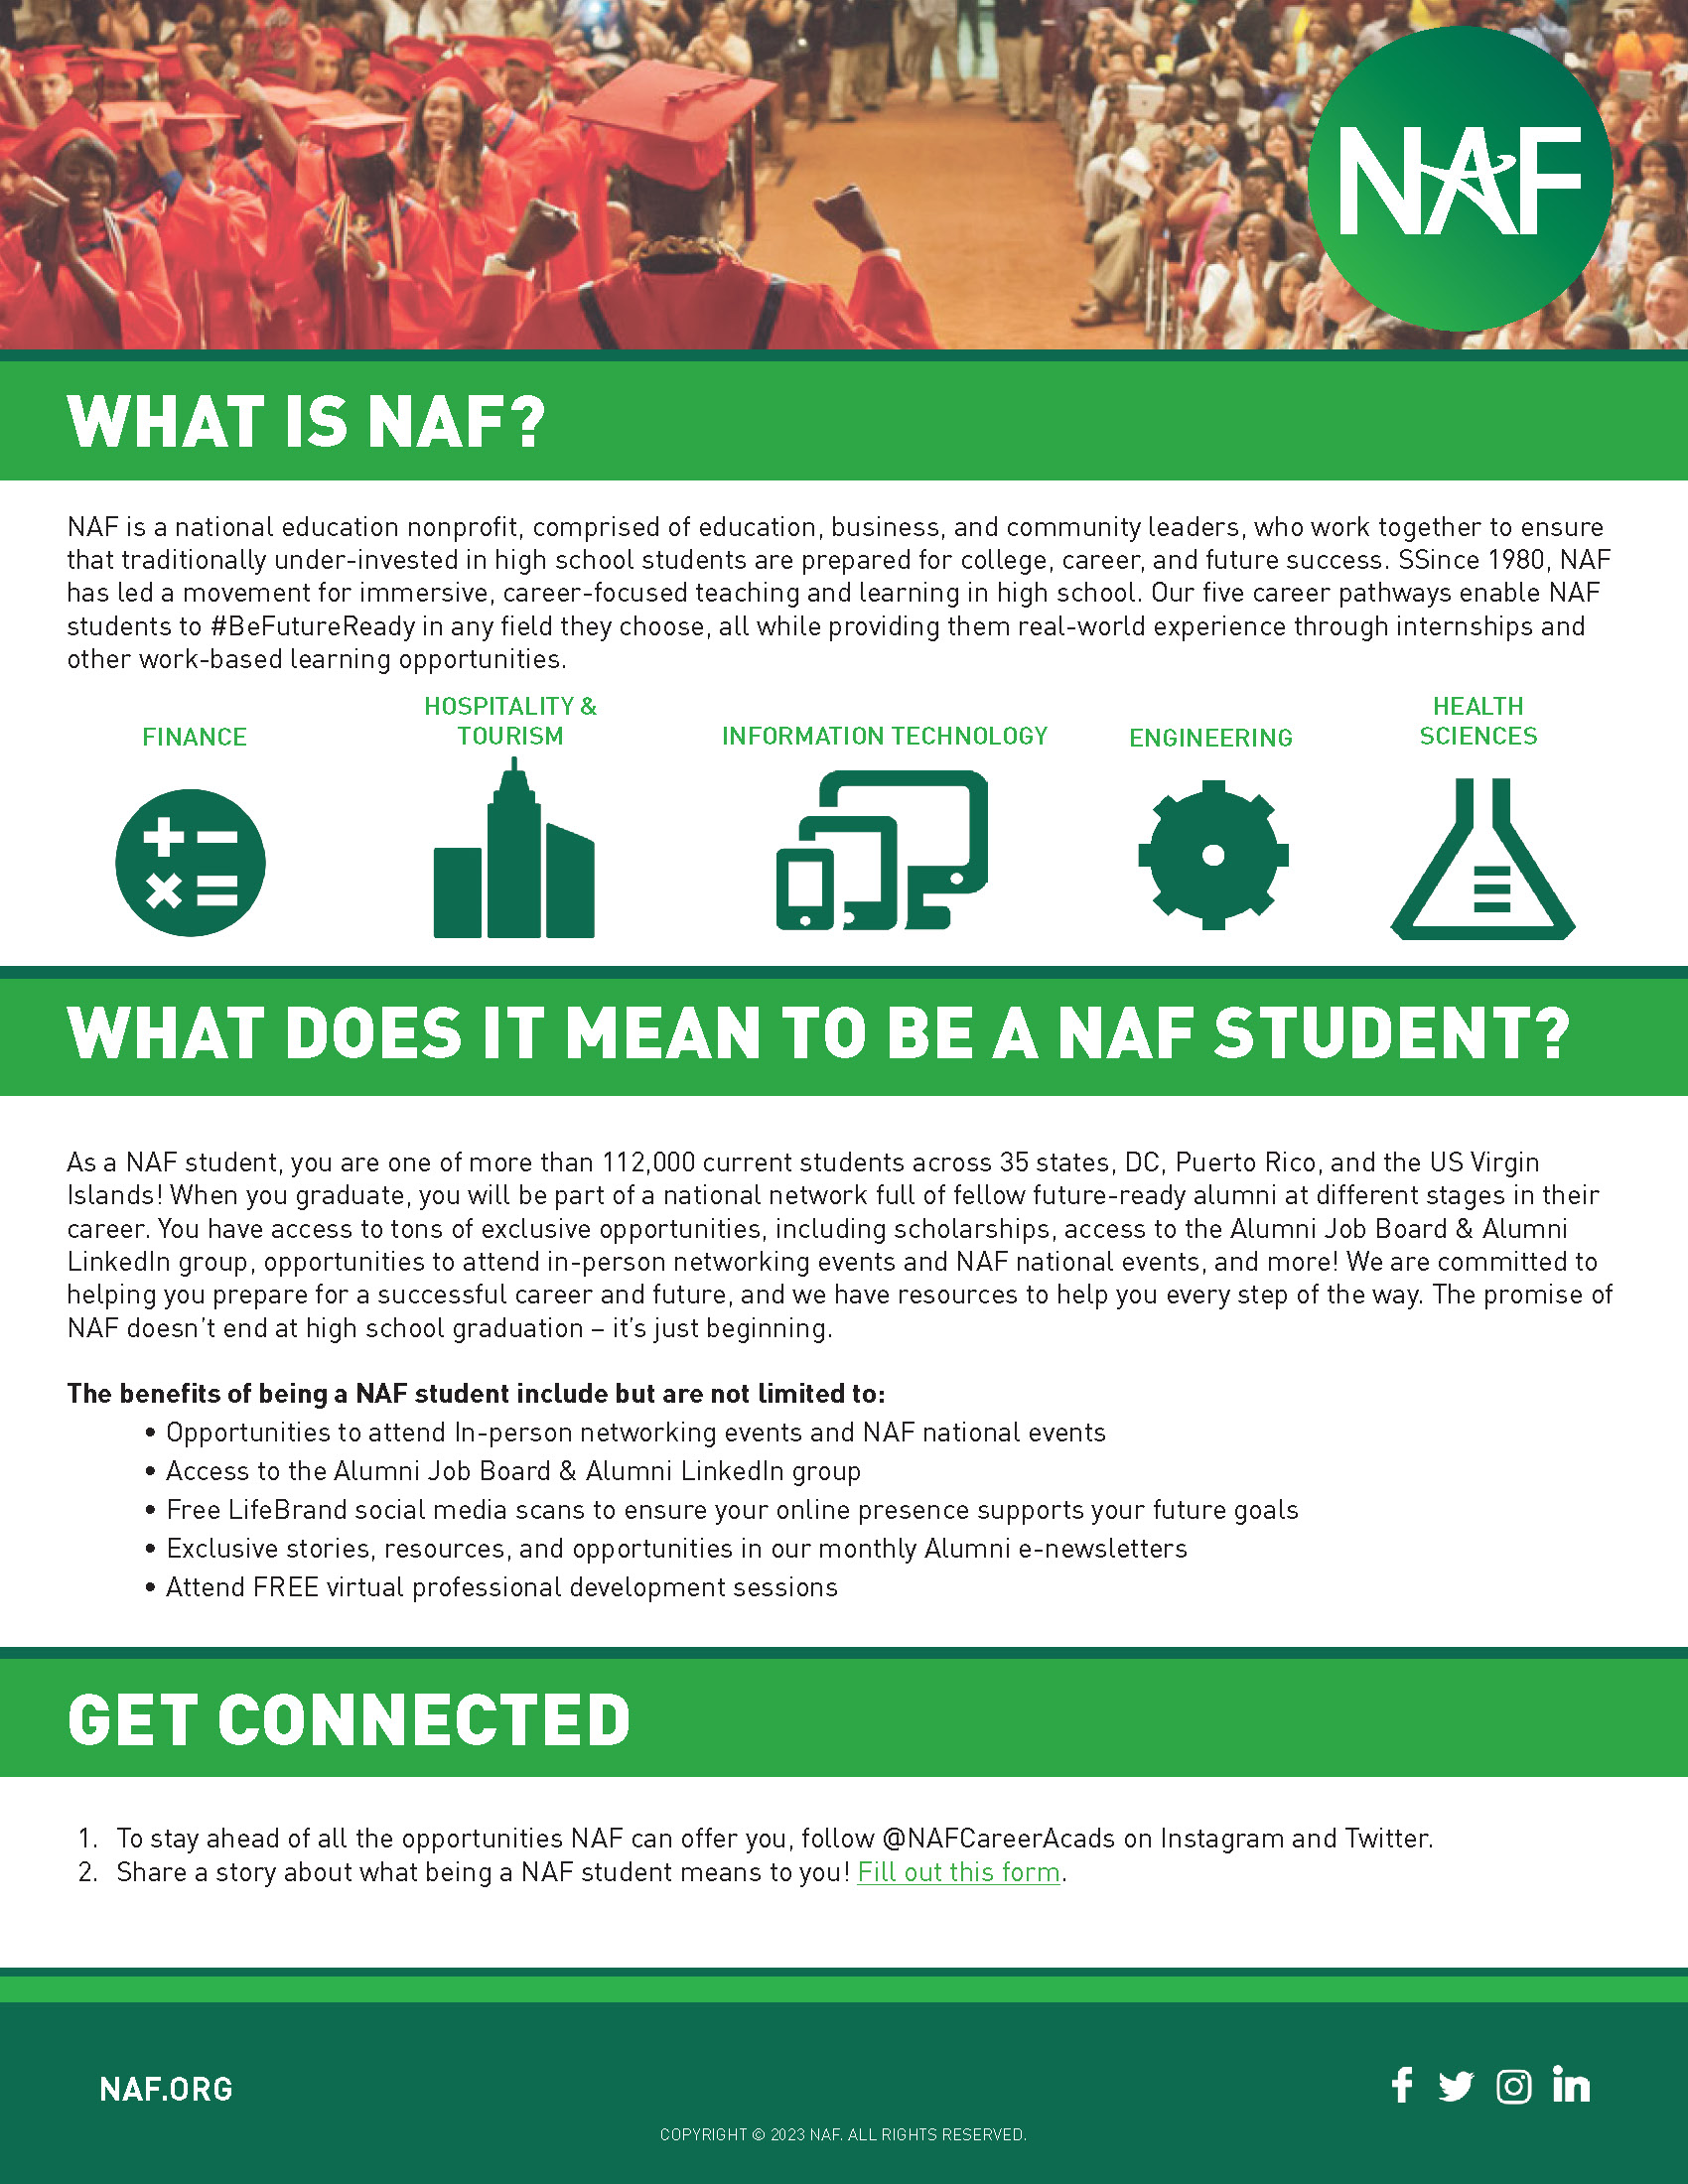 What is NAF?